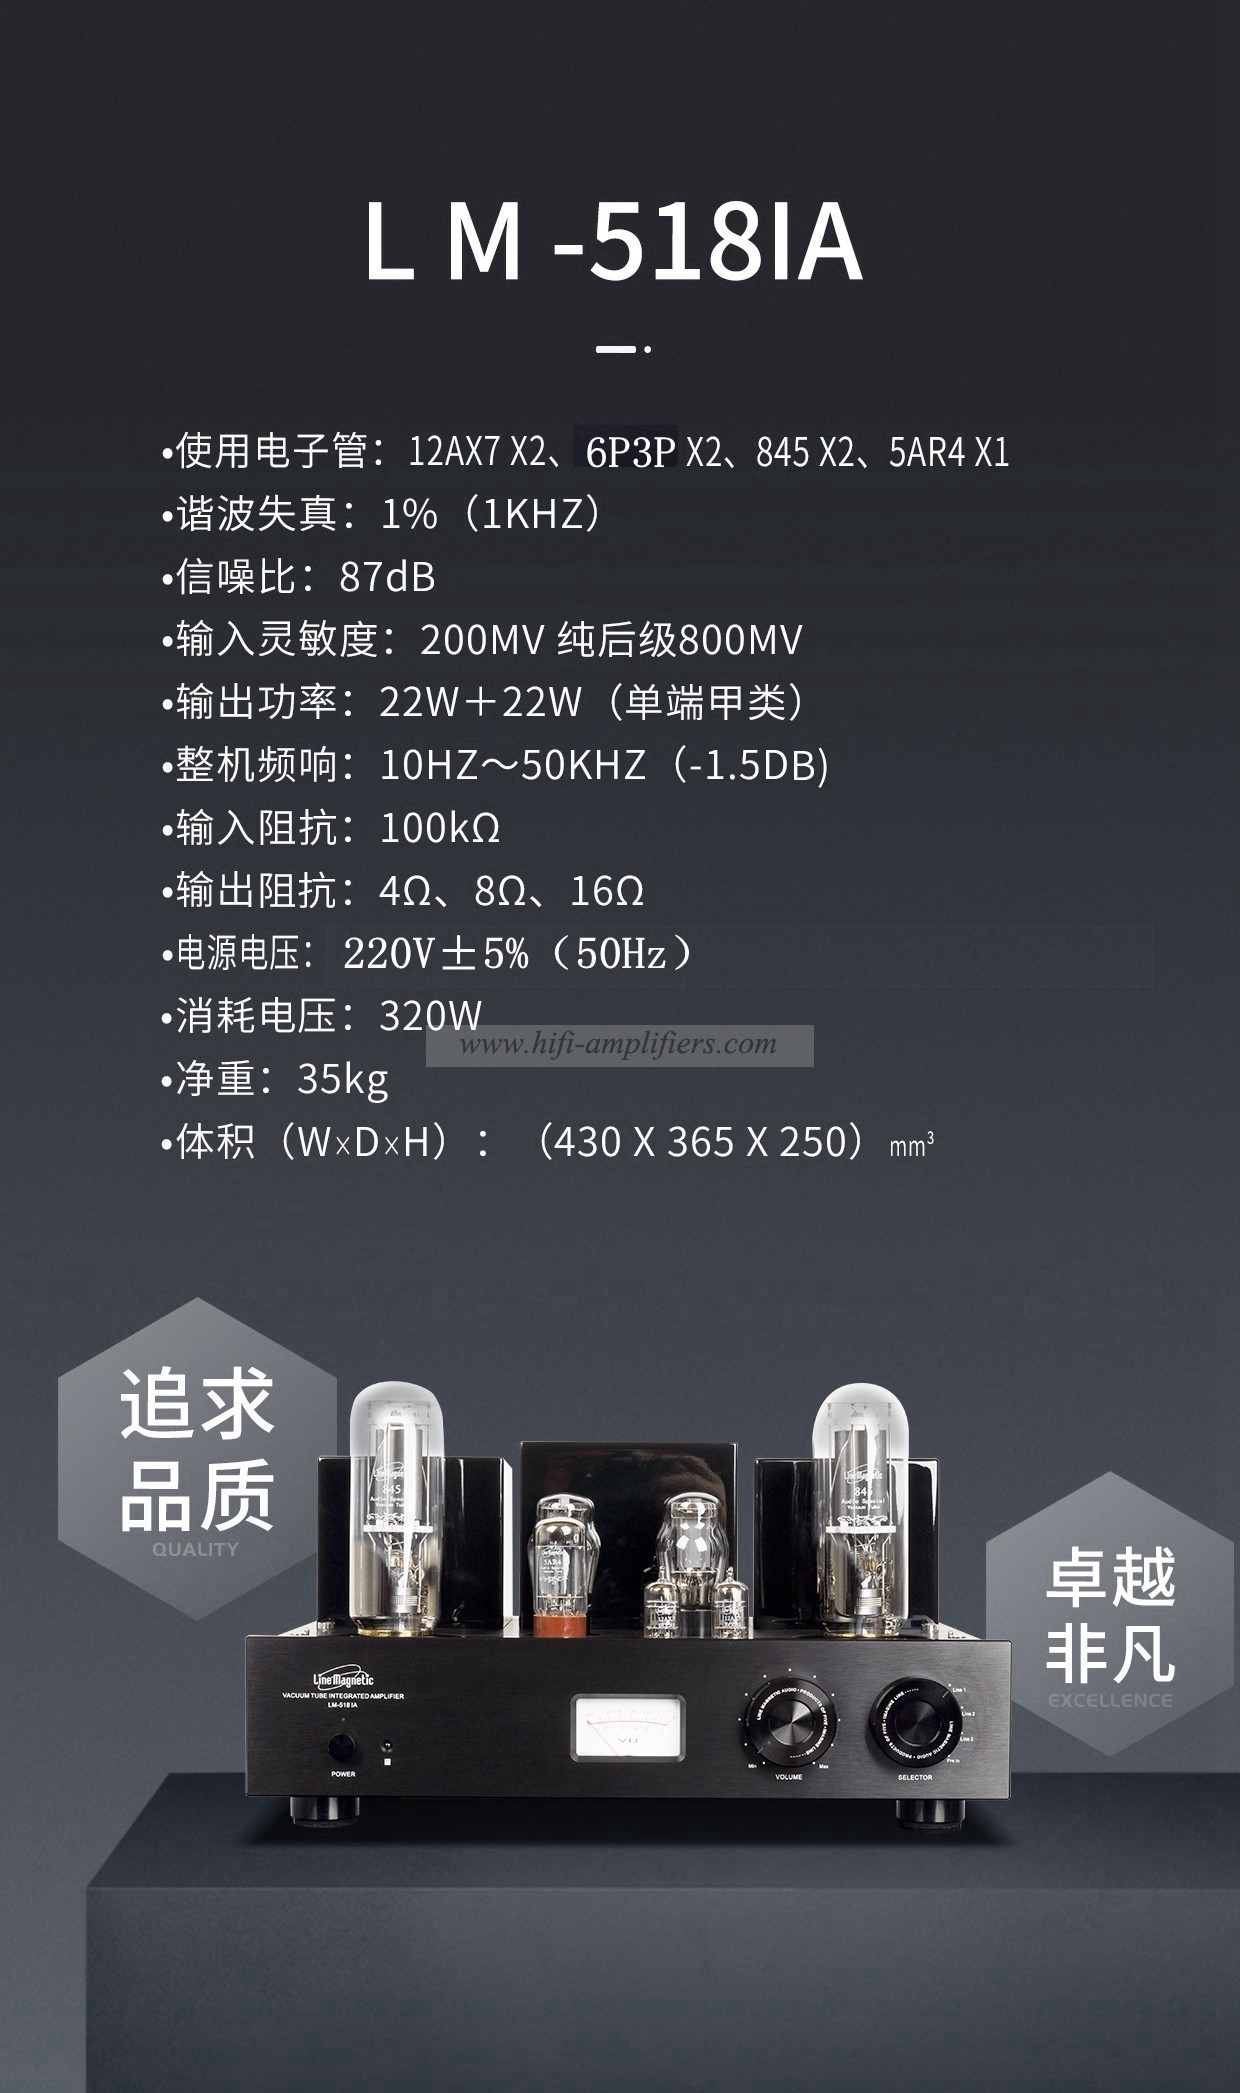 Line Magnetic LM-518IA Integrated Tube Amplifier 845*2 Class A Single-ended Amplifier 24W*2